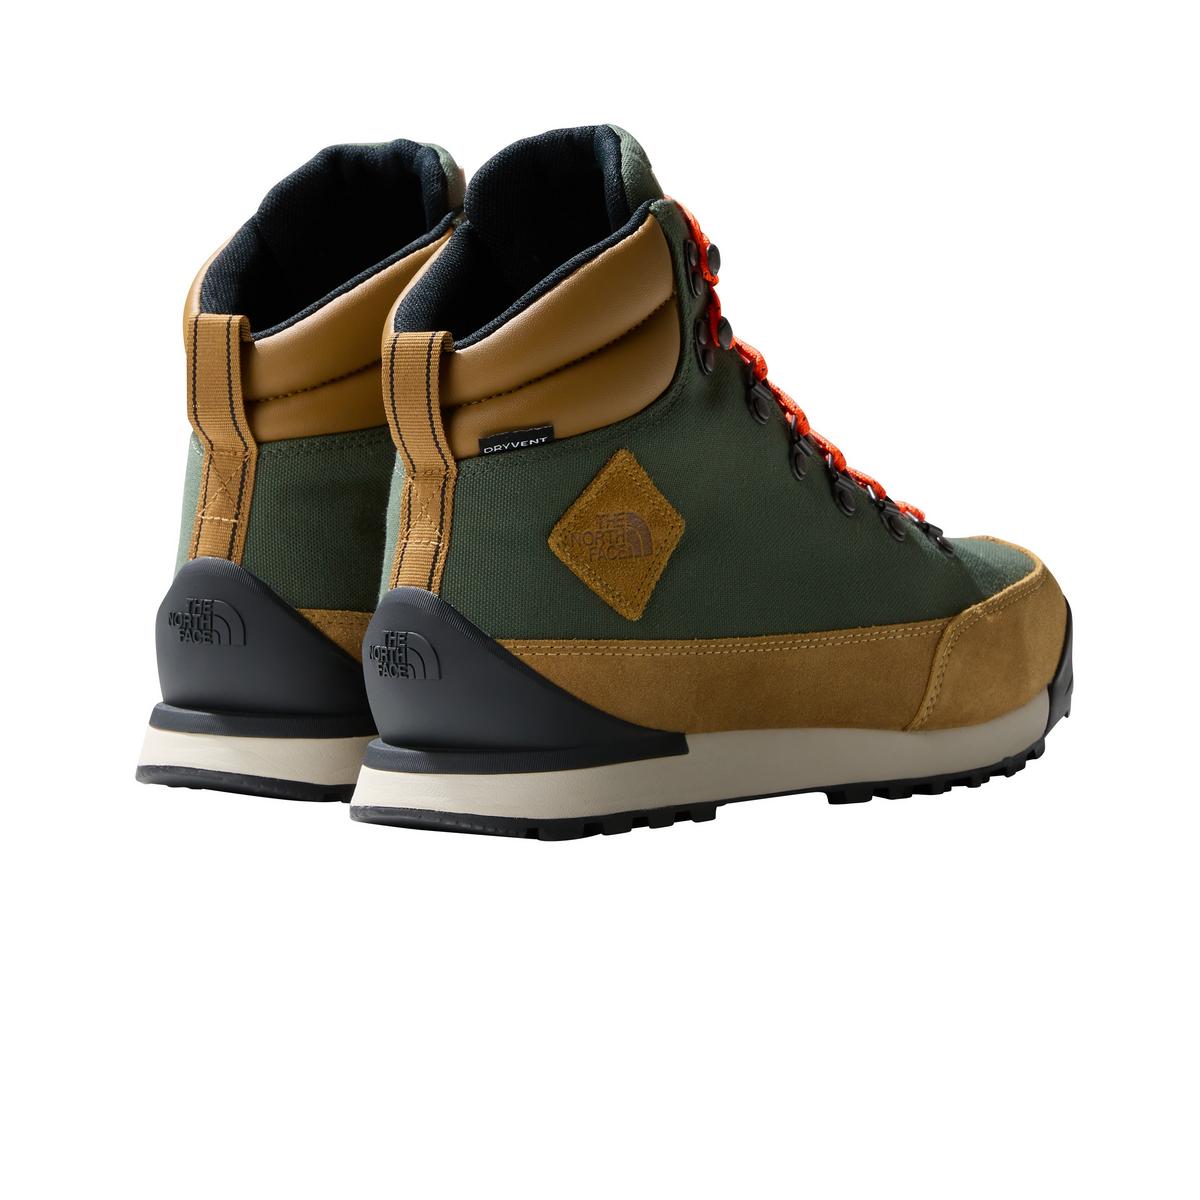 The North Face Men's Back to Berkeley Waterproof Lifestyle Boots - Green